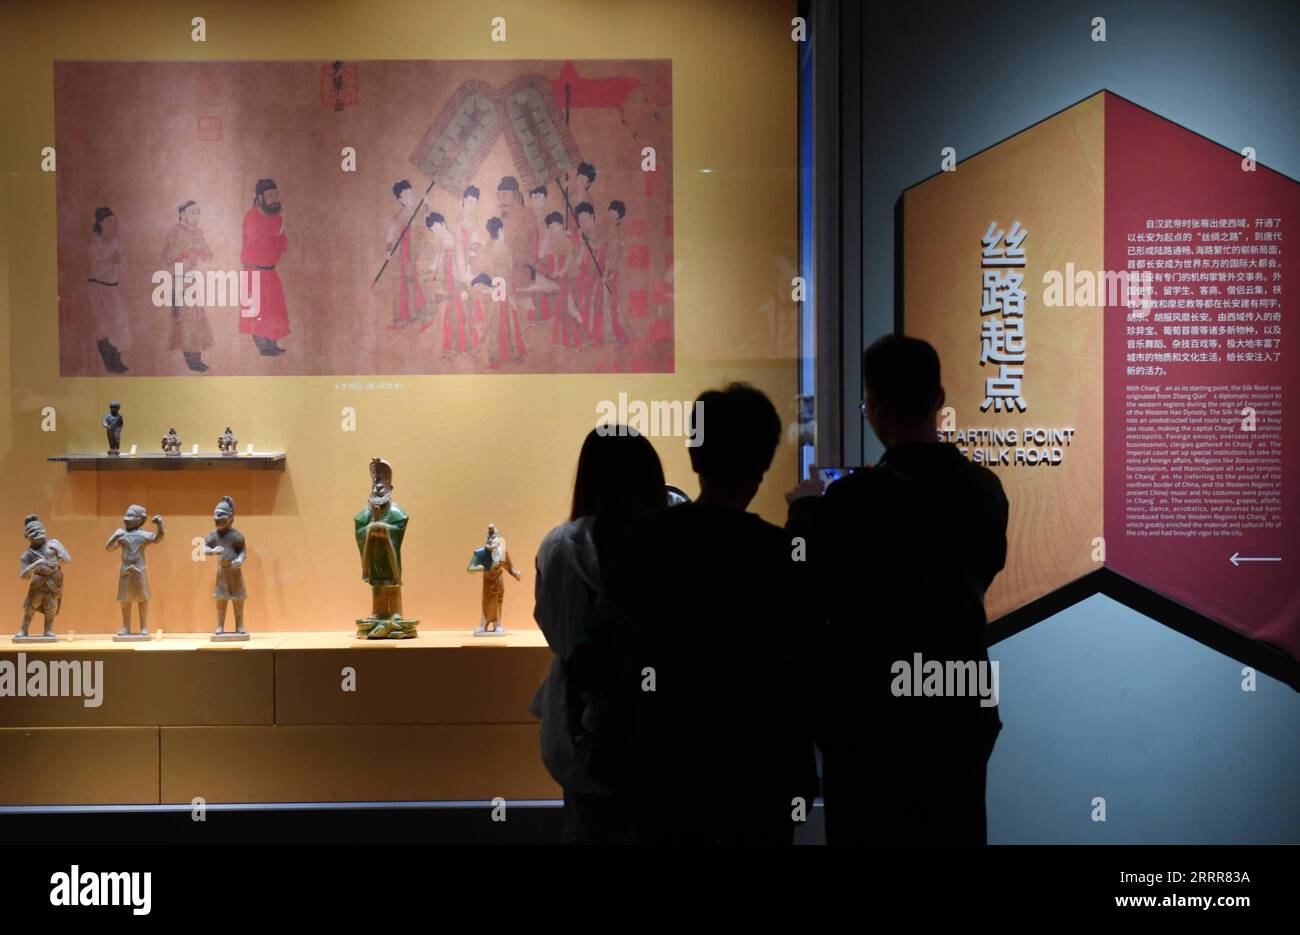 230513 -- XI AN, May 13, 2023 -- Tourists look at pottery figurines of foreign visitors to China at Xi an Museum in Xi an, northwest China s Shaanxi Province, May 8, 2023. Founded about 3,100 years ago, Xi an, which is today the capital of China s Shaanxi Province, served as the capital for 13 dynasties in Chinese history. This is also the place where Zhang Qian, an envoy of the Western Han Dynasty 202 BC-25 AD, began his journey to the Western regions via Central Asia. This expedition eventually led to the opening of the Silk Road. Xi an has a total of 159 museums, attracting over 30 million Stock Photo